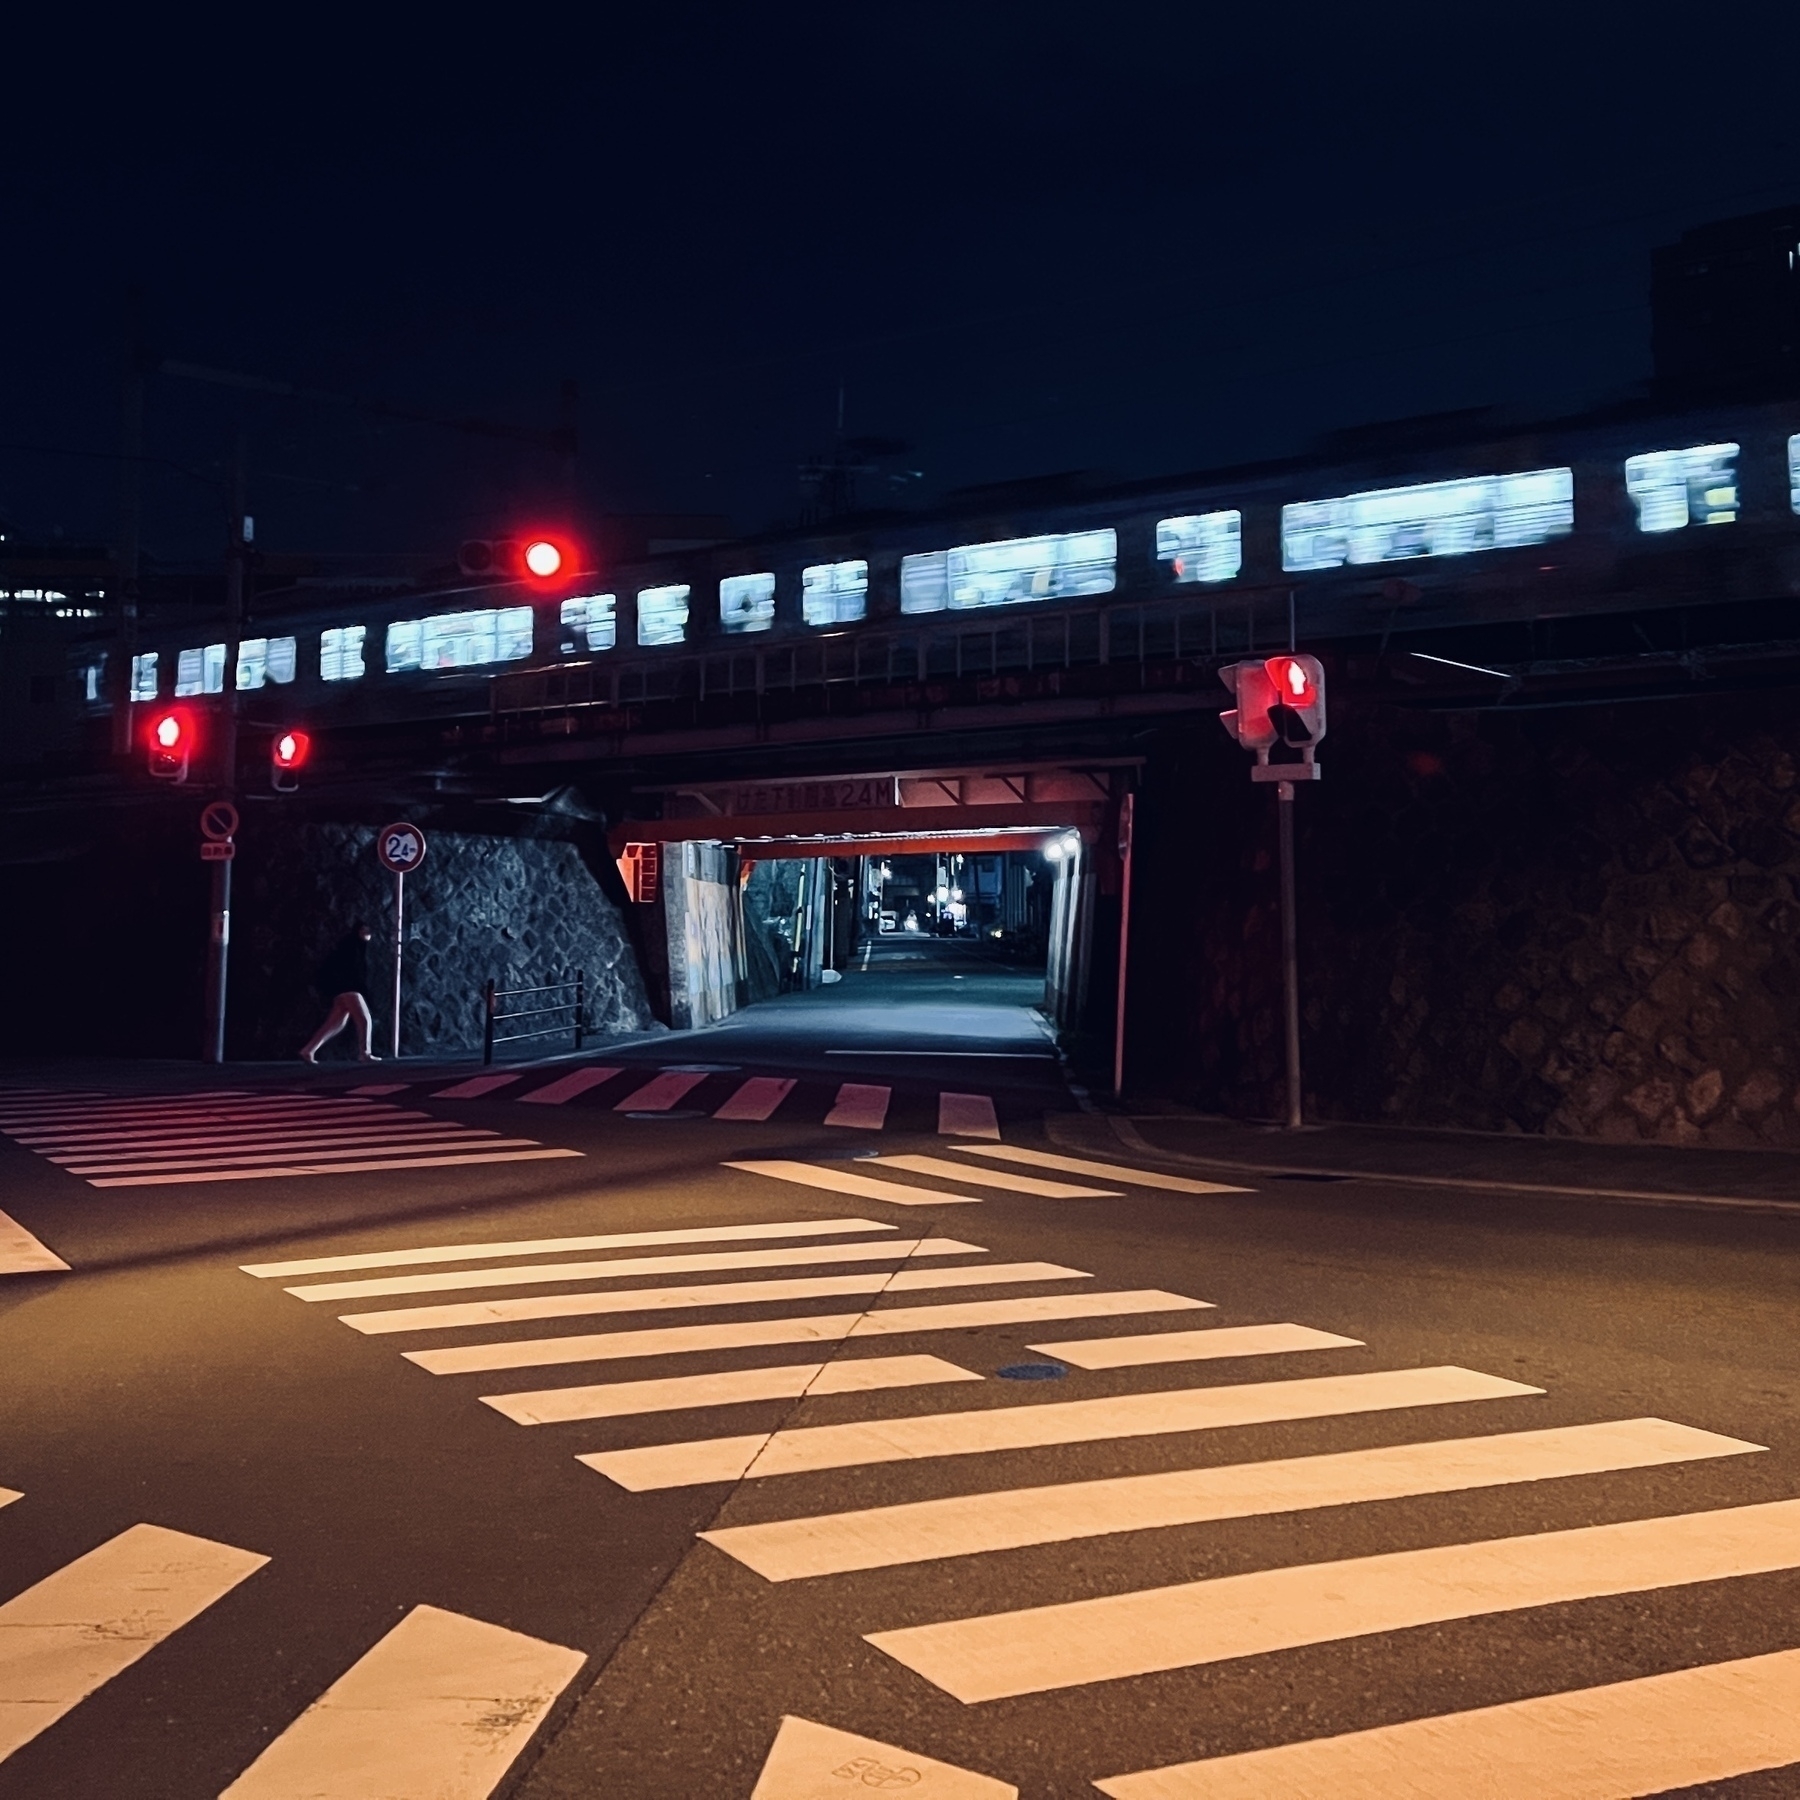 Late night photo. Train passes by. Below is a short tunnel under the tracks, with someone about to walk through. The foreground shows an empty crosswalk scramble. 